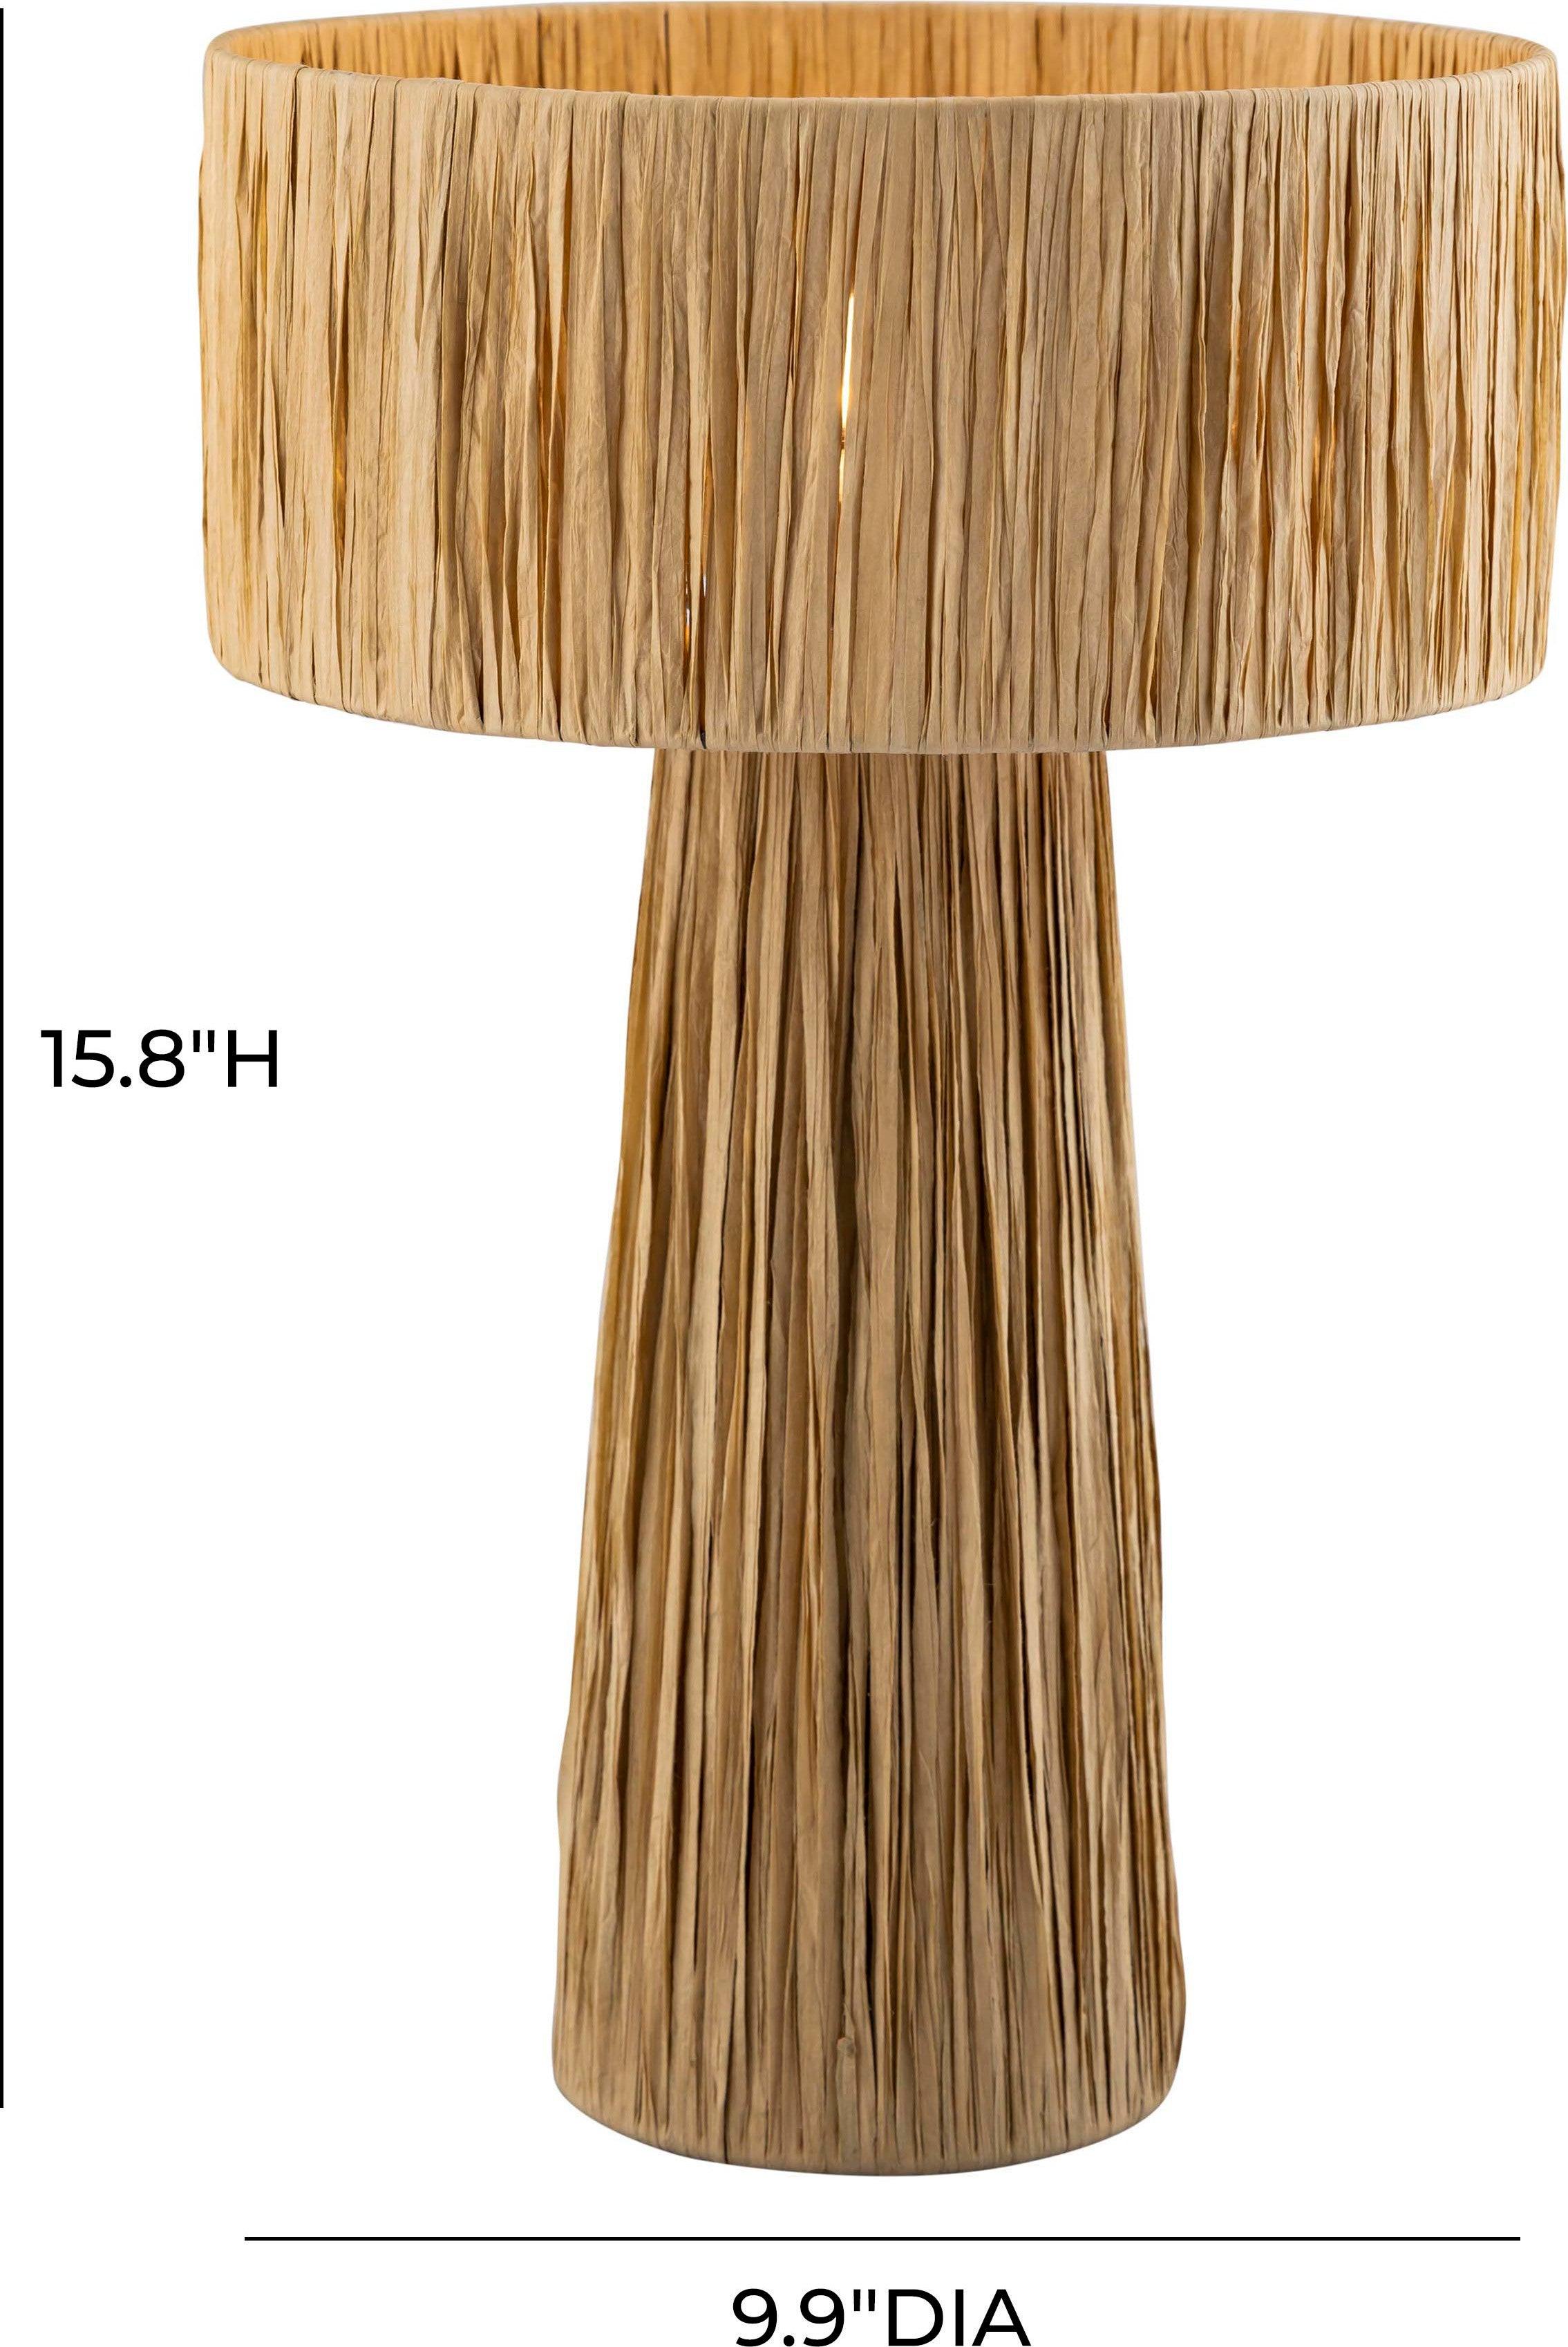 Tov Furniture Table Lamps - Shelby Rafia Table Lamp Natural